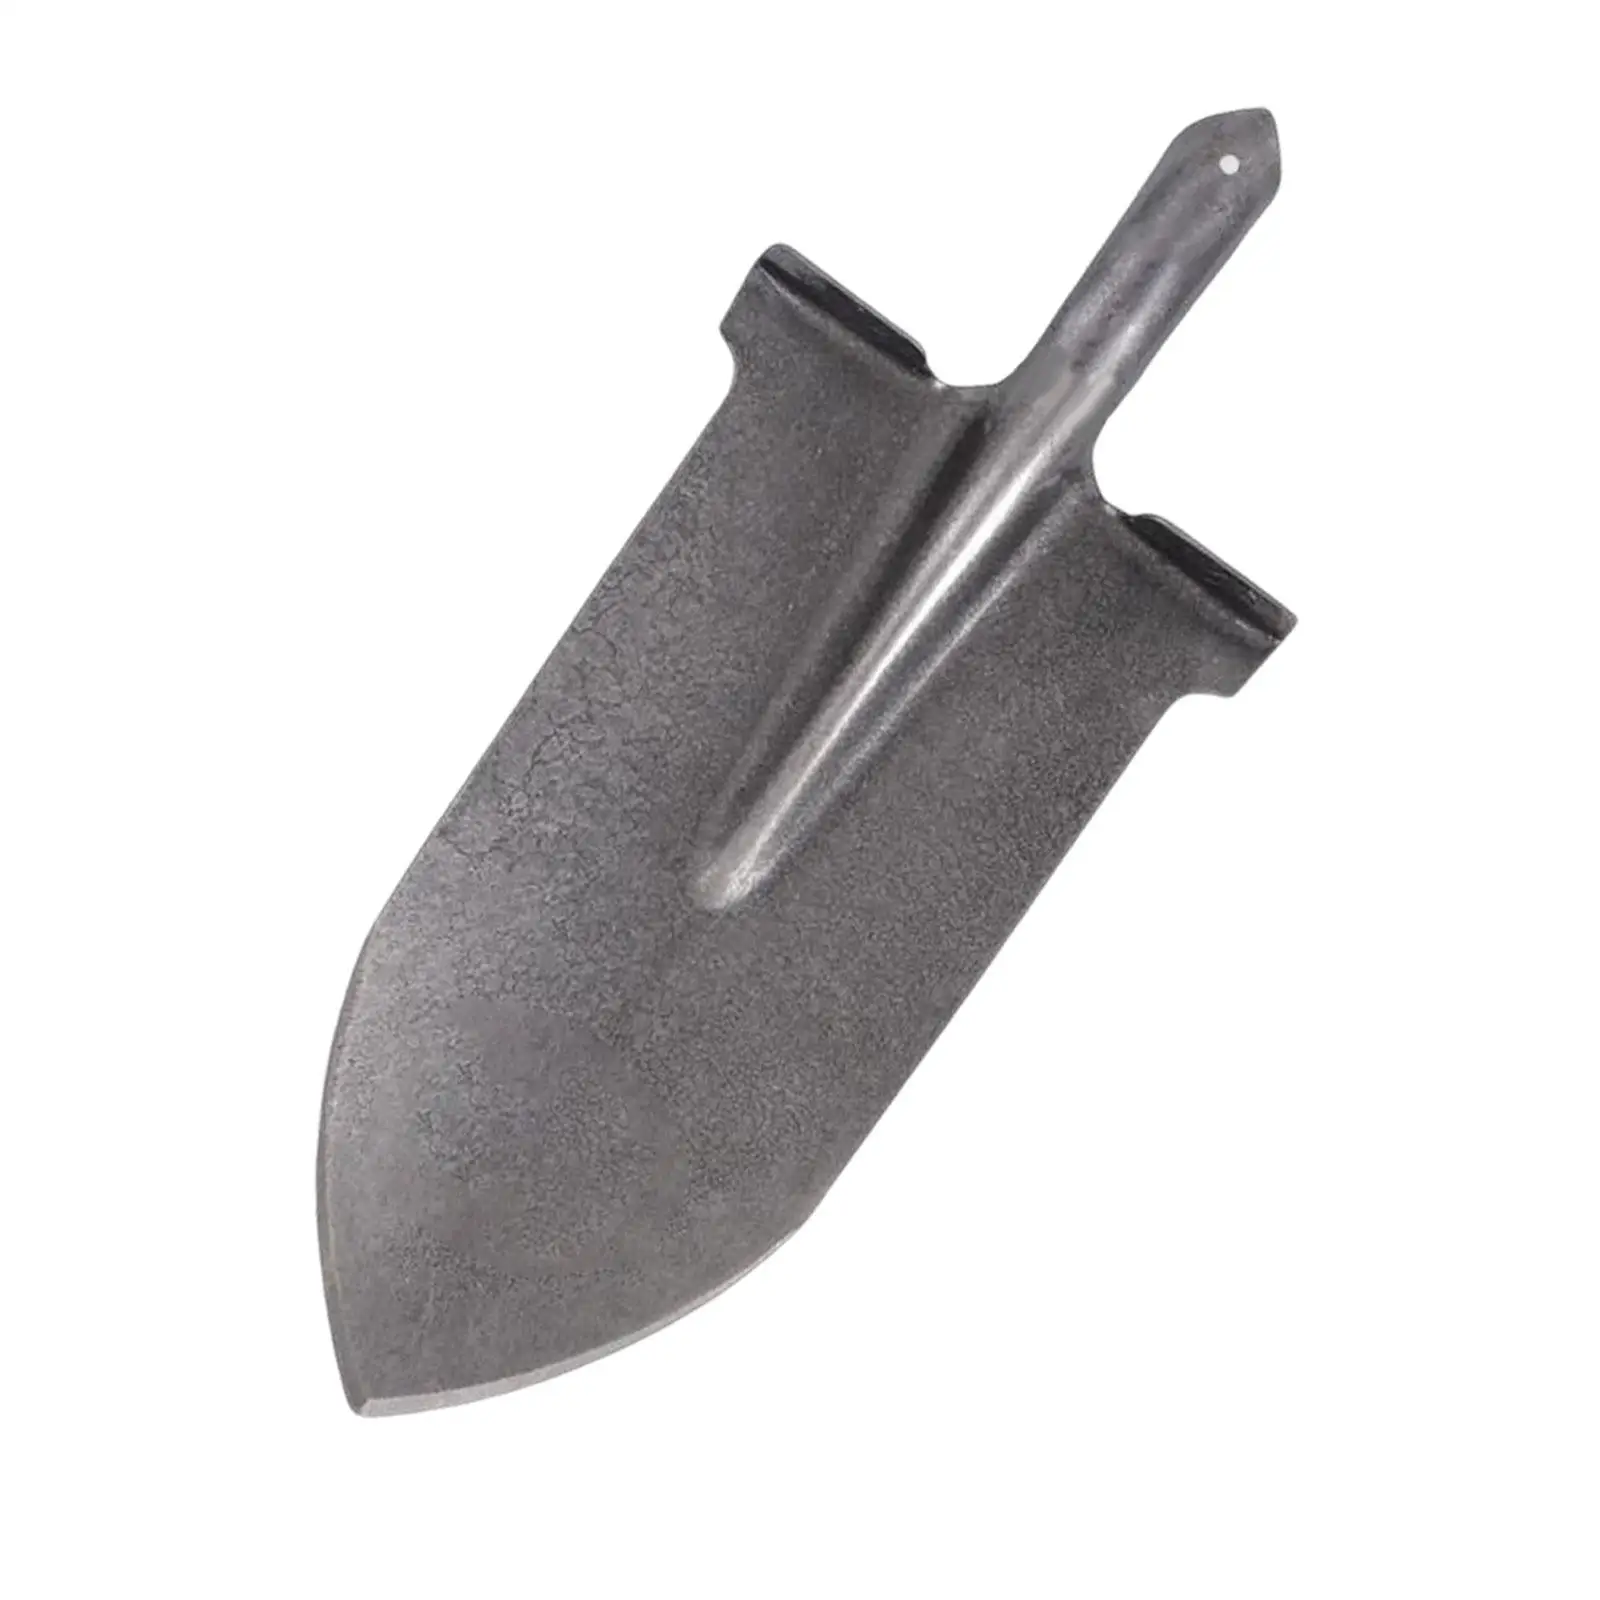 Backpacking Trowel Multipurpose Heavy Duty Outdoor Sturdy Garden Hand Trowel for Fishing Backpacking Moving Planting Hiking